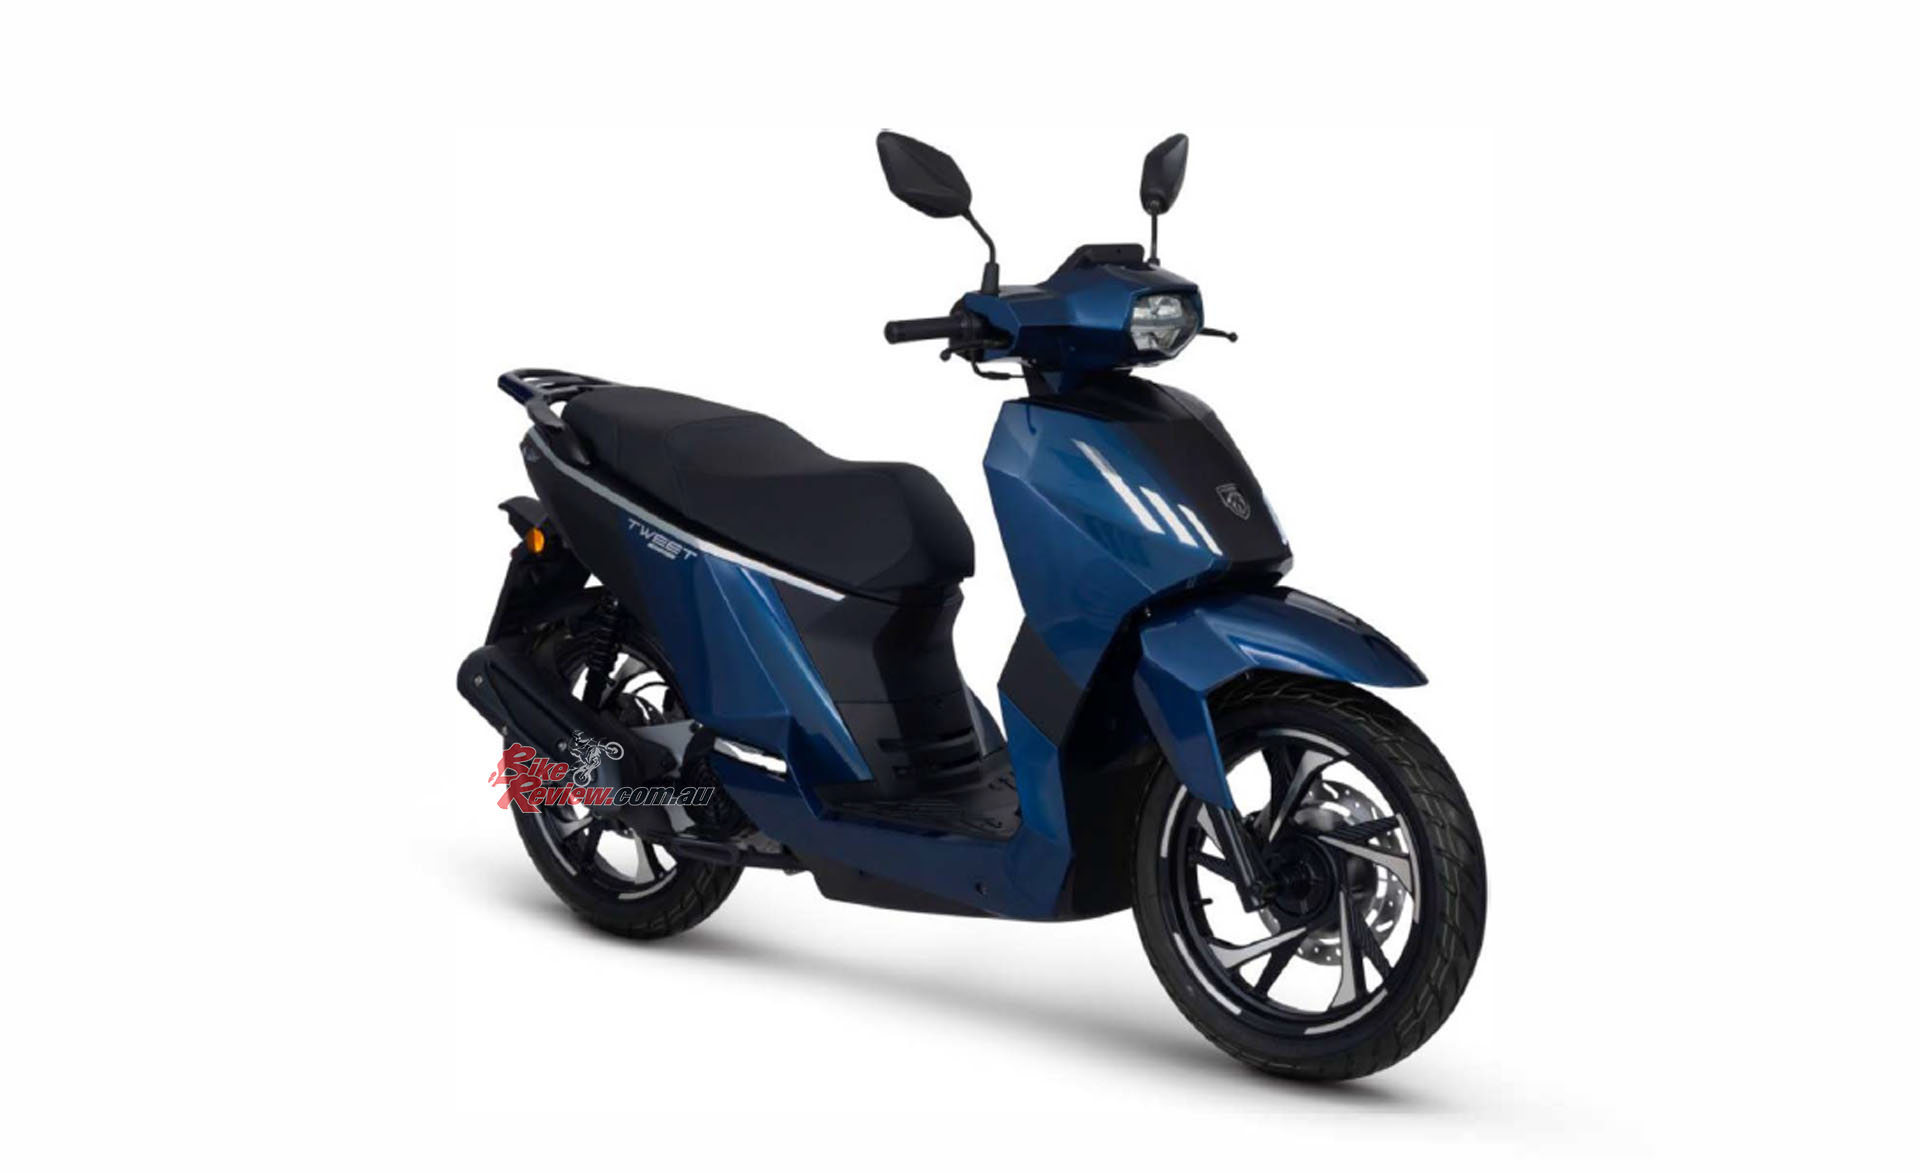 Appreciated for its large wheels, its stability and its practicality, Peugeot Tweet is one of the best-selling two-wheelers in Europe.